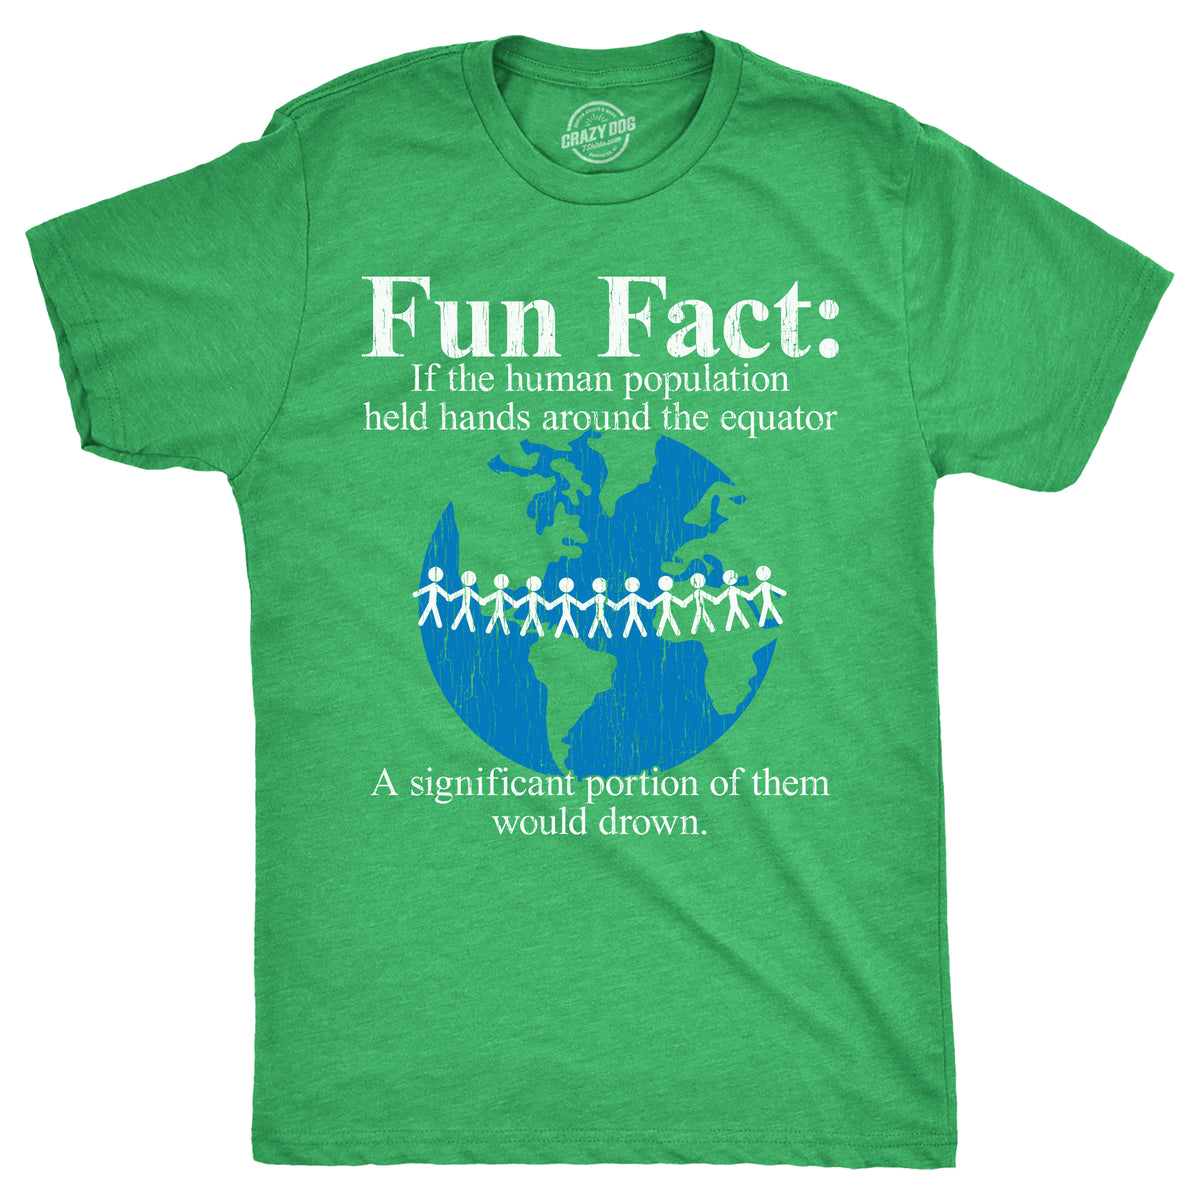 Funny Heather Green - FUNFACT Fun Fact If The Human Population Held Hands Around The Equator A Significant Portion Of Them Would Drown Mens T Shirt Nerdy sarcastic Tee